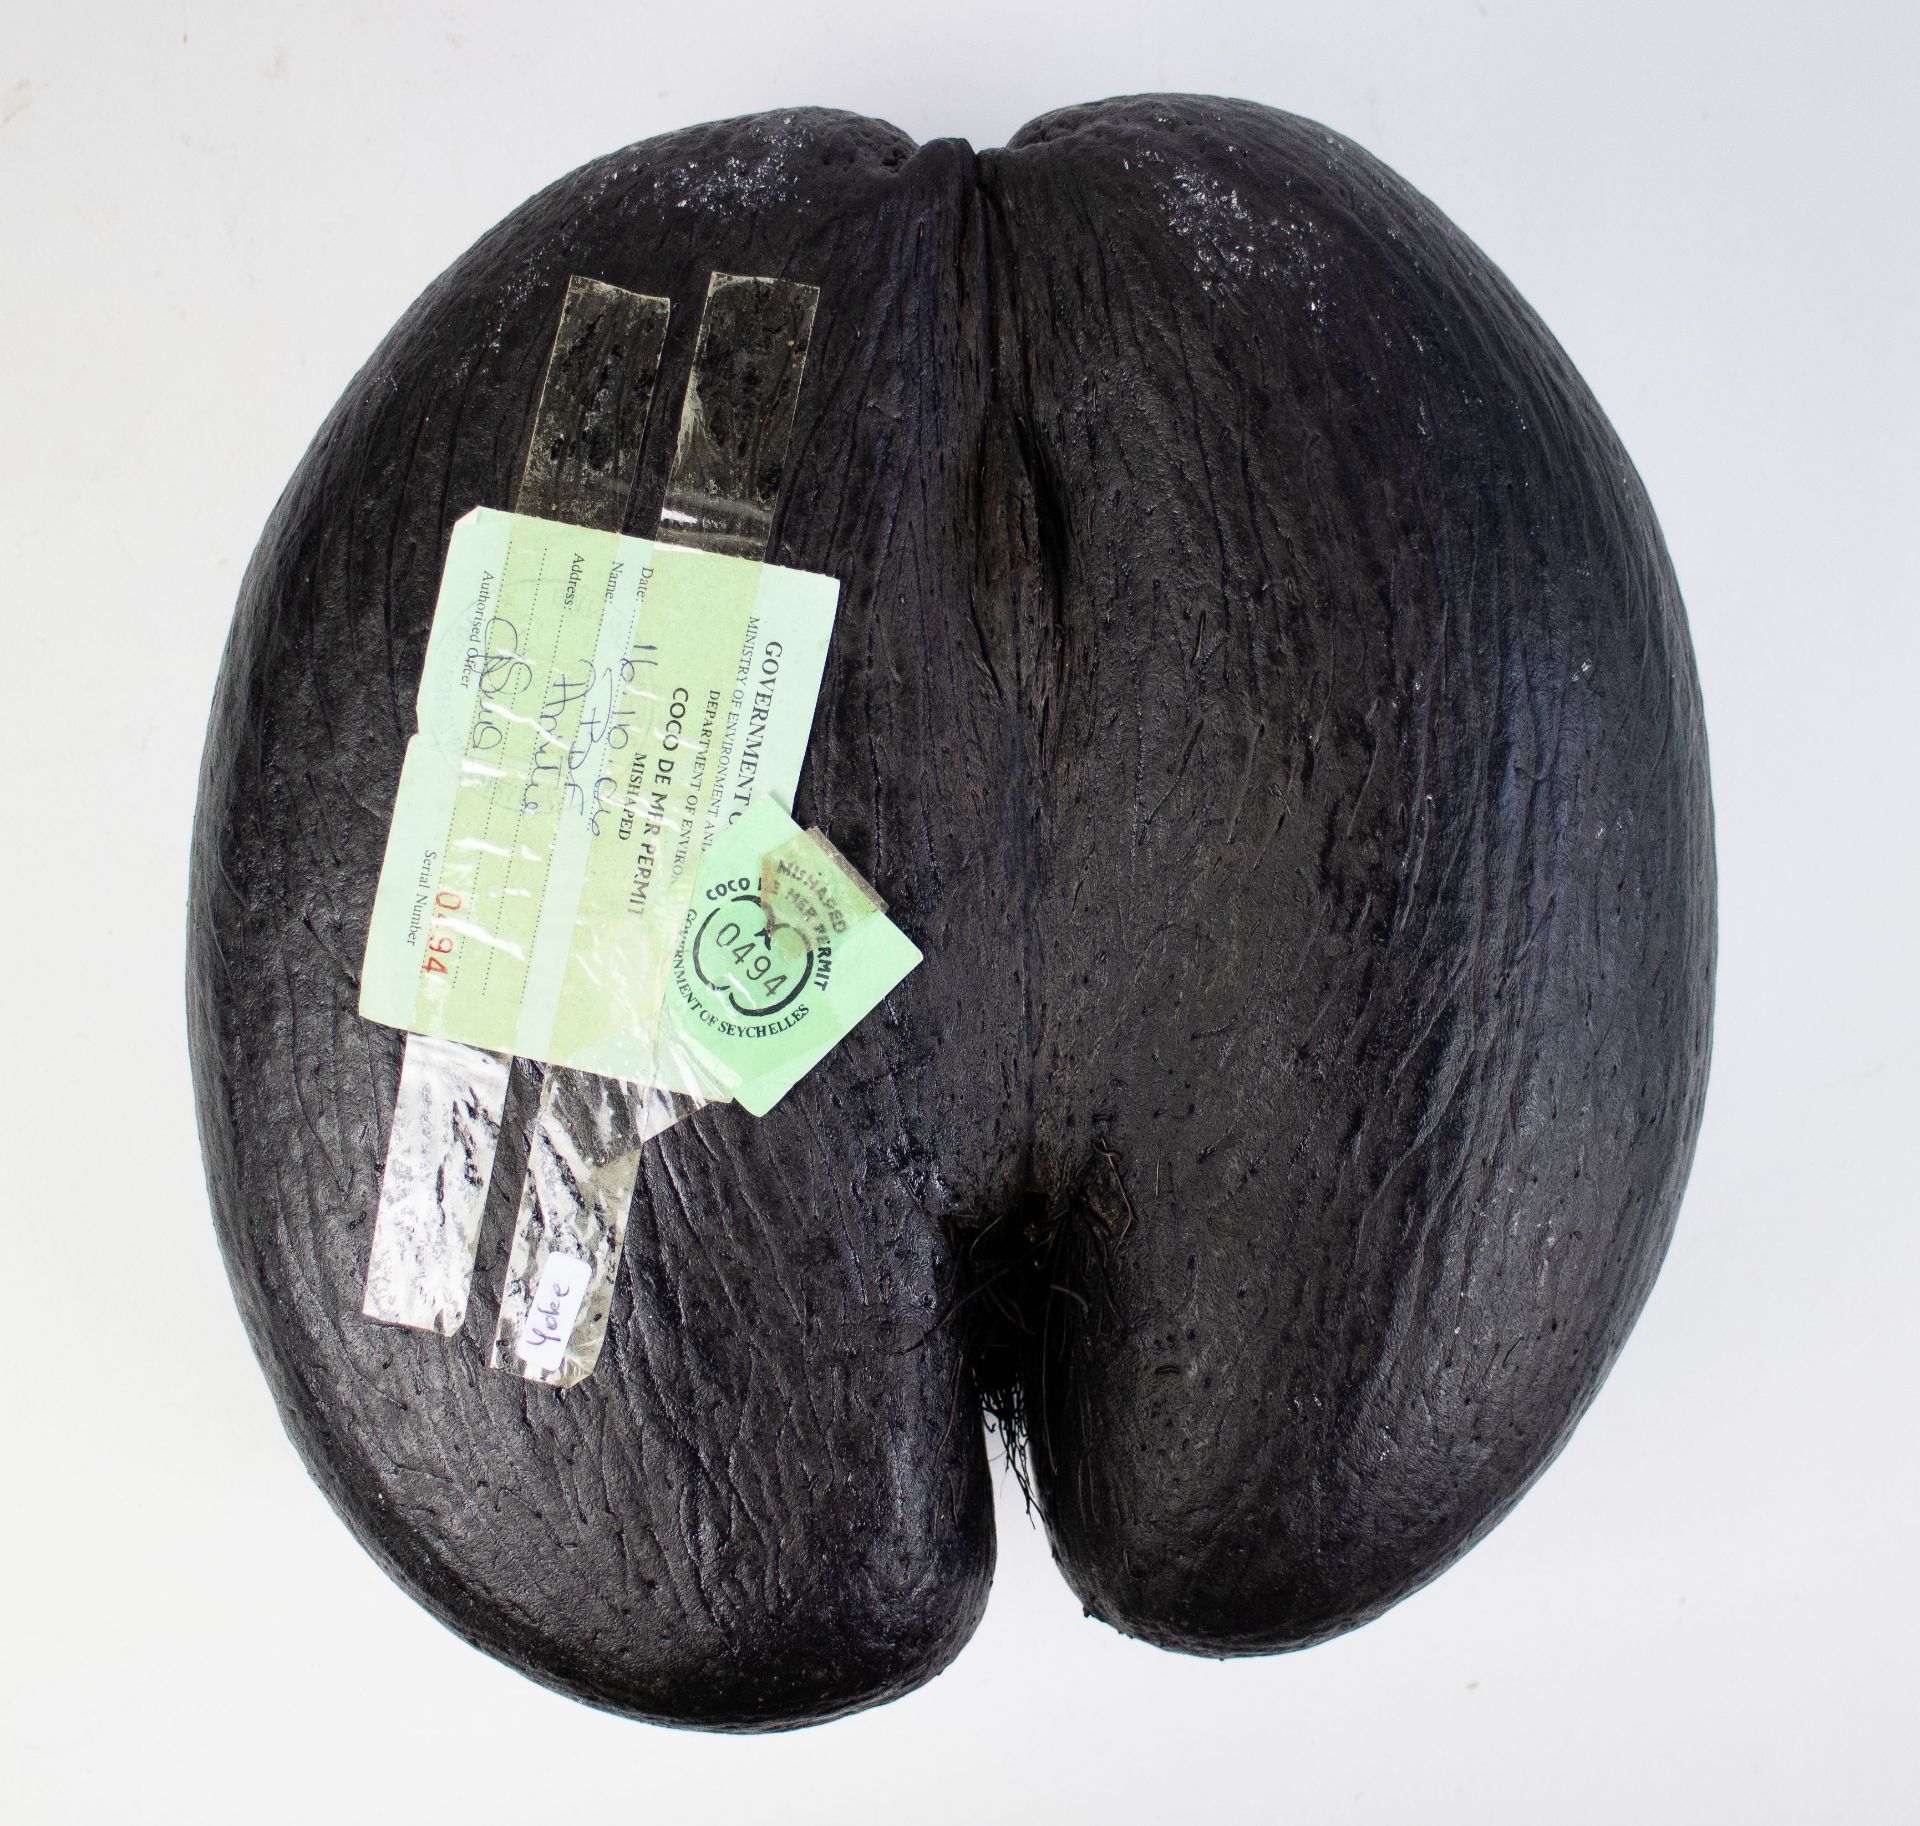 Coco de mer nut from the Seychelles - Image 2 of 3